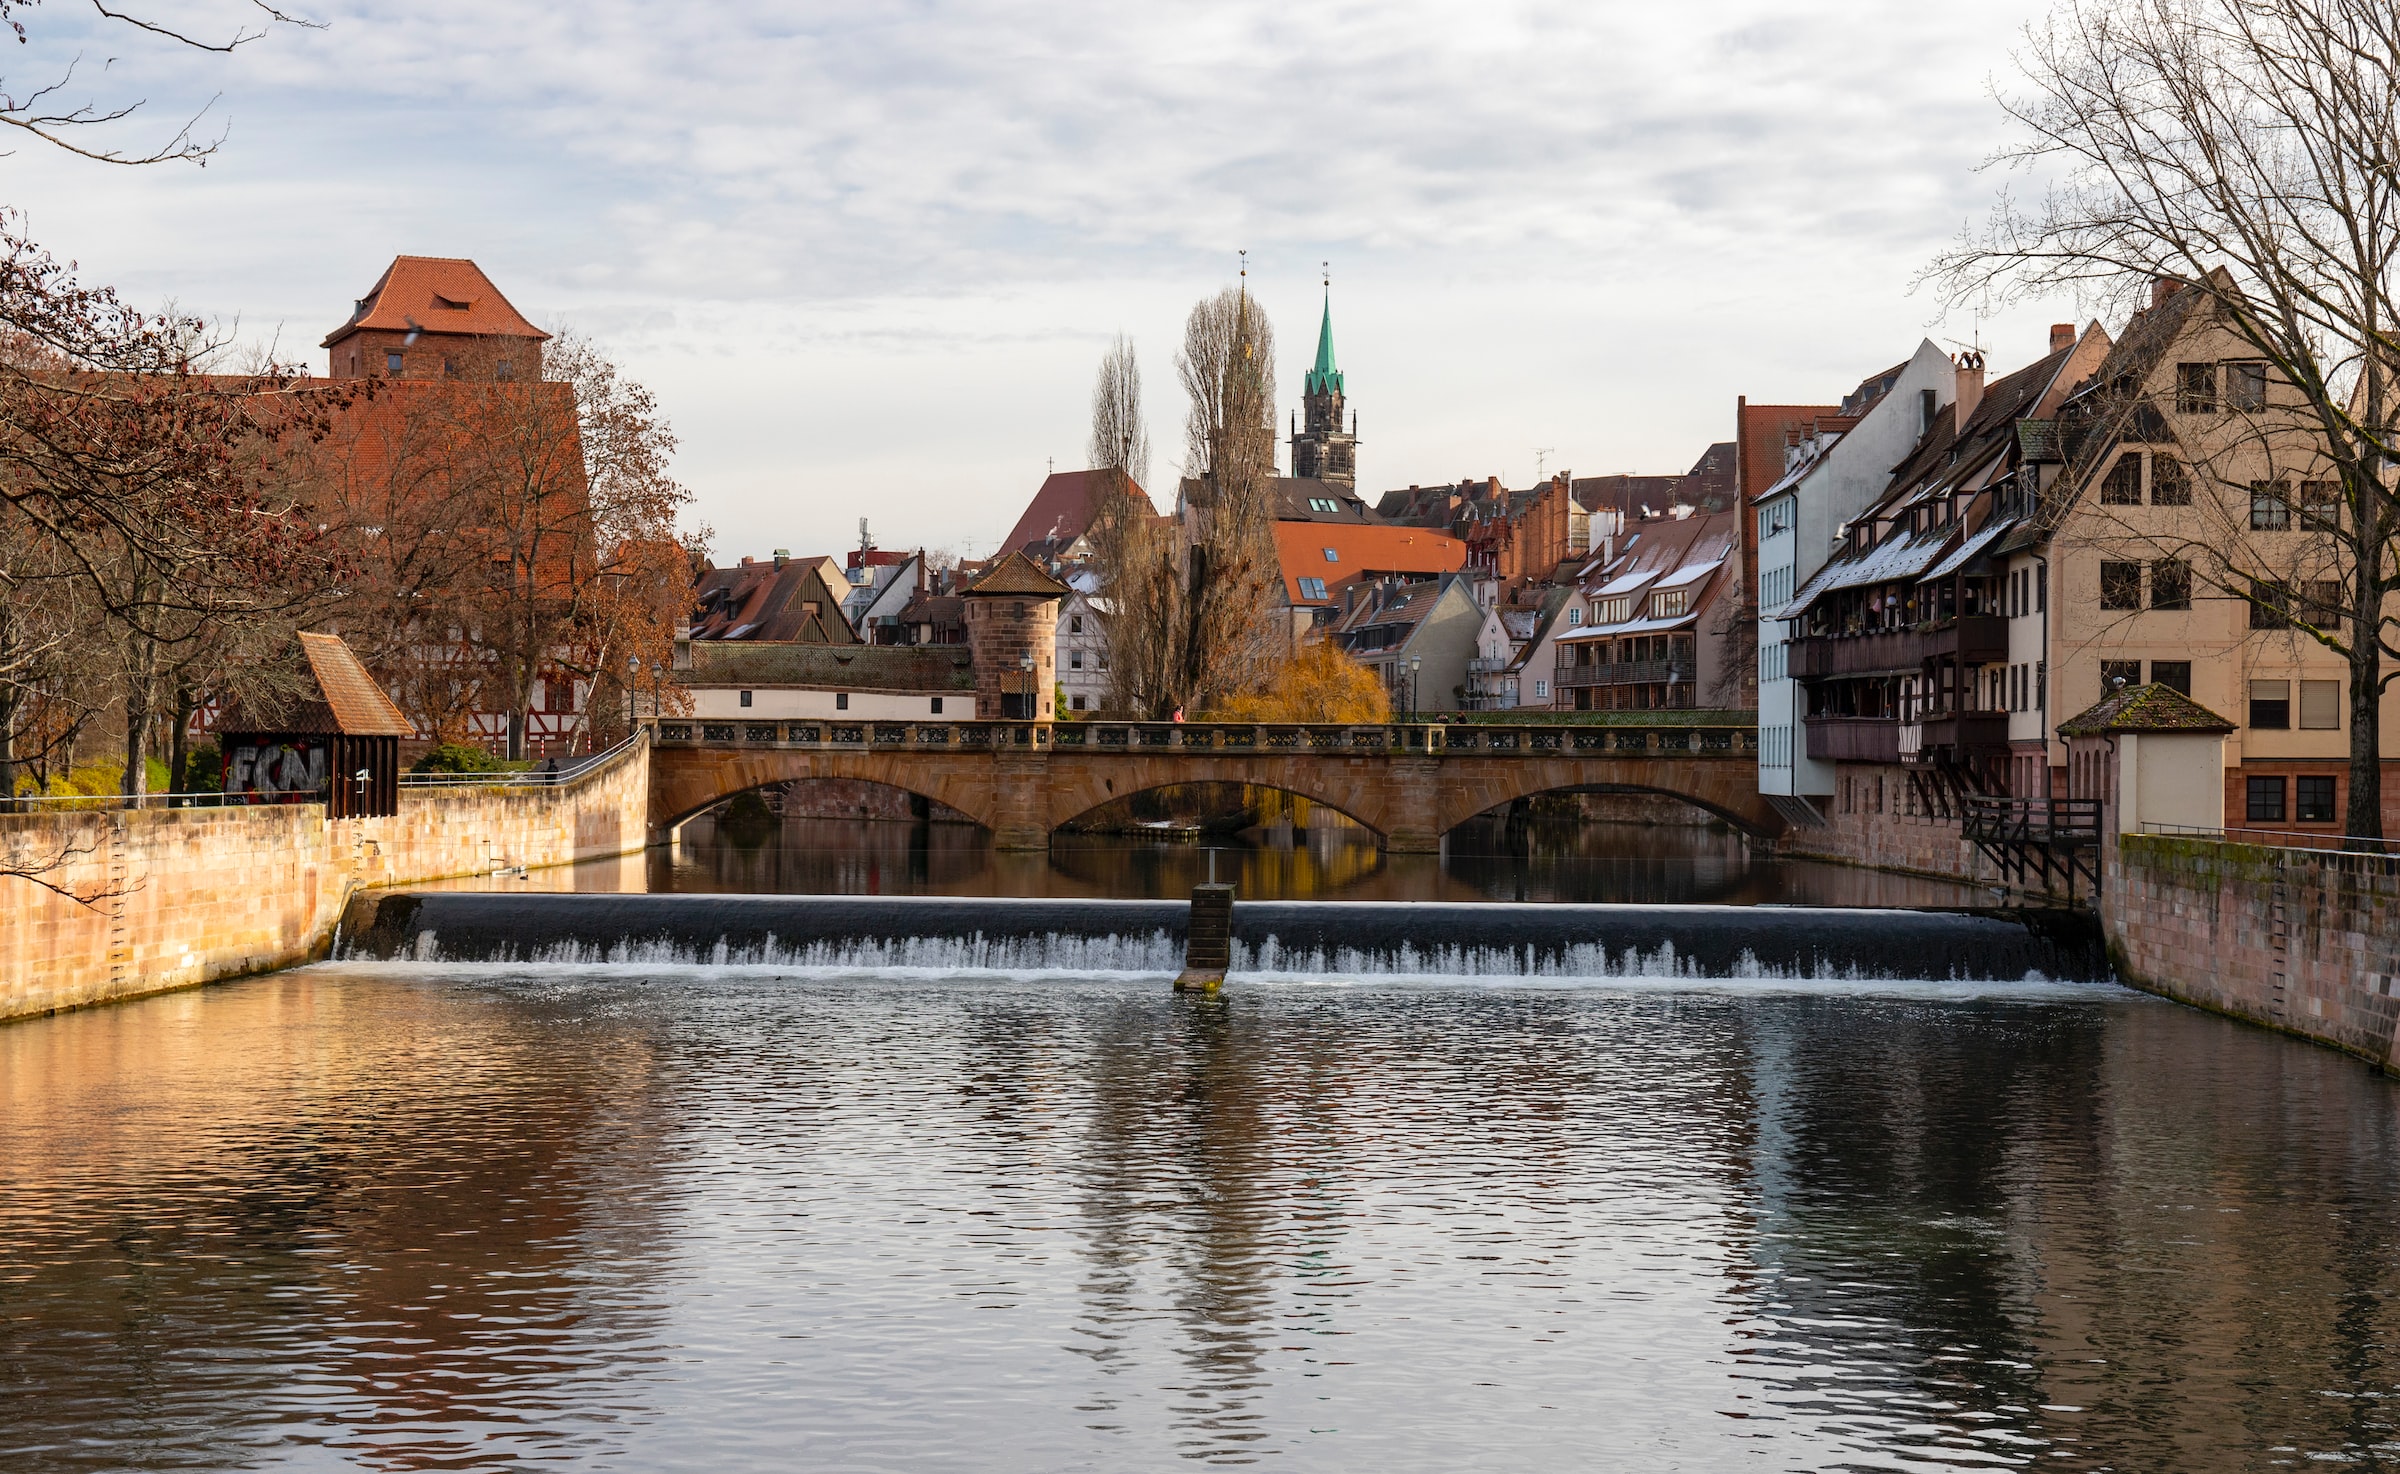 To Nuremberg: A letter to the city I fell in love with and will be forever